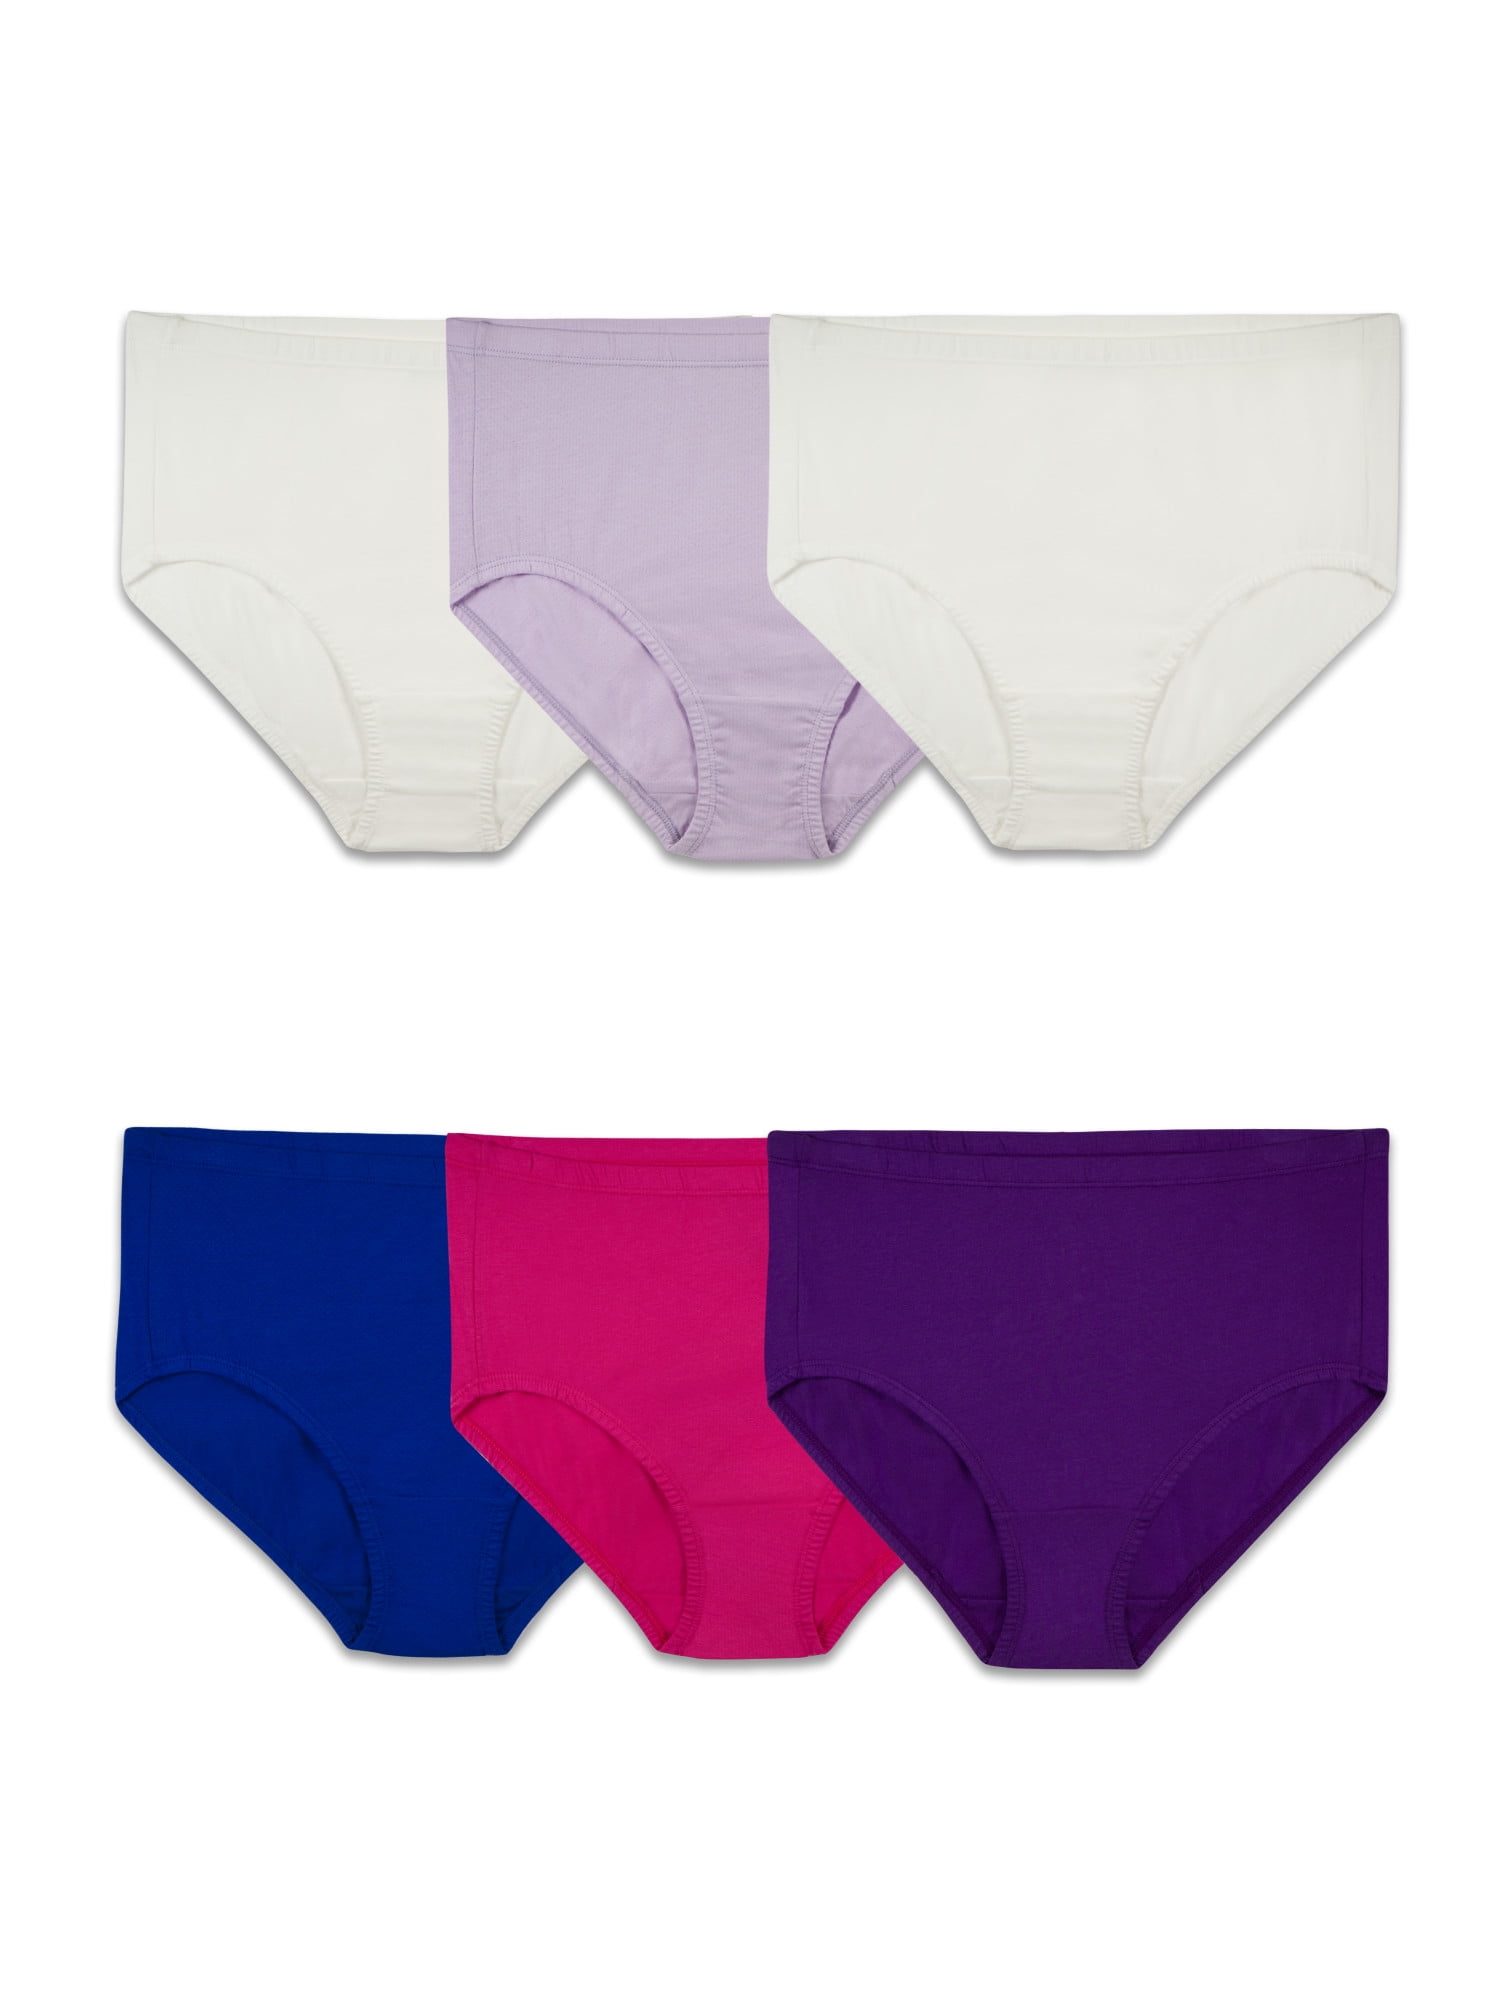 Warmword Size M-4XL 5-Pack Womens Cotton Panties Full Coverage Panty,Comfy Cotton Granny Panties Full Cut